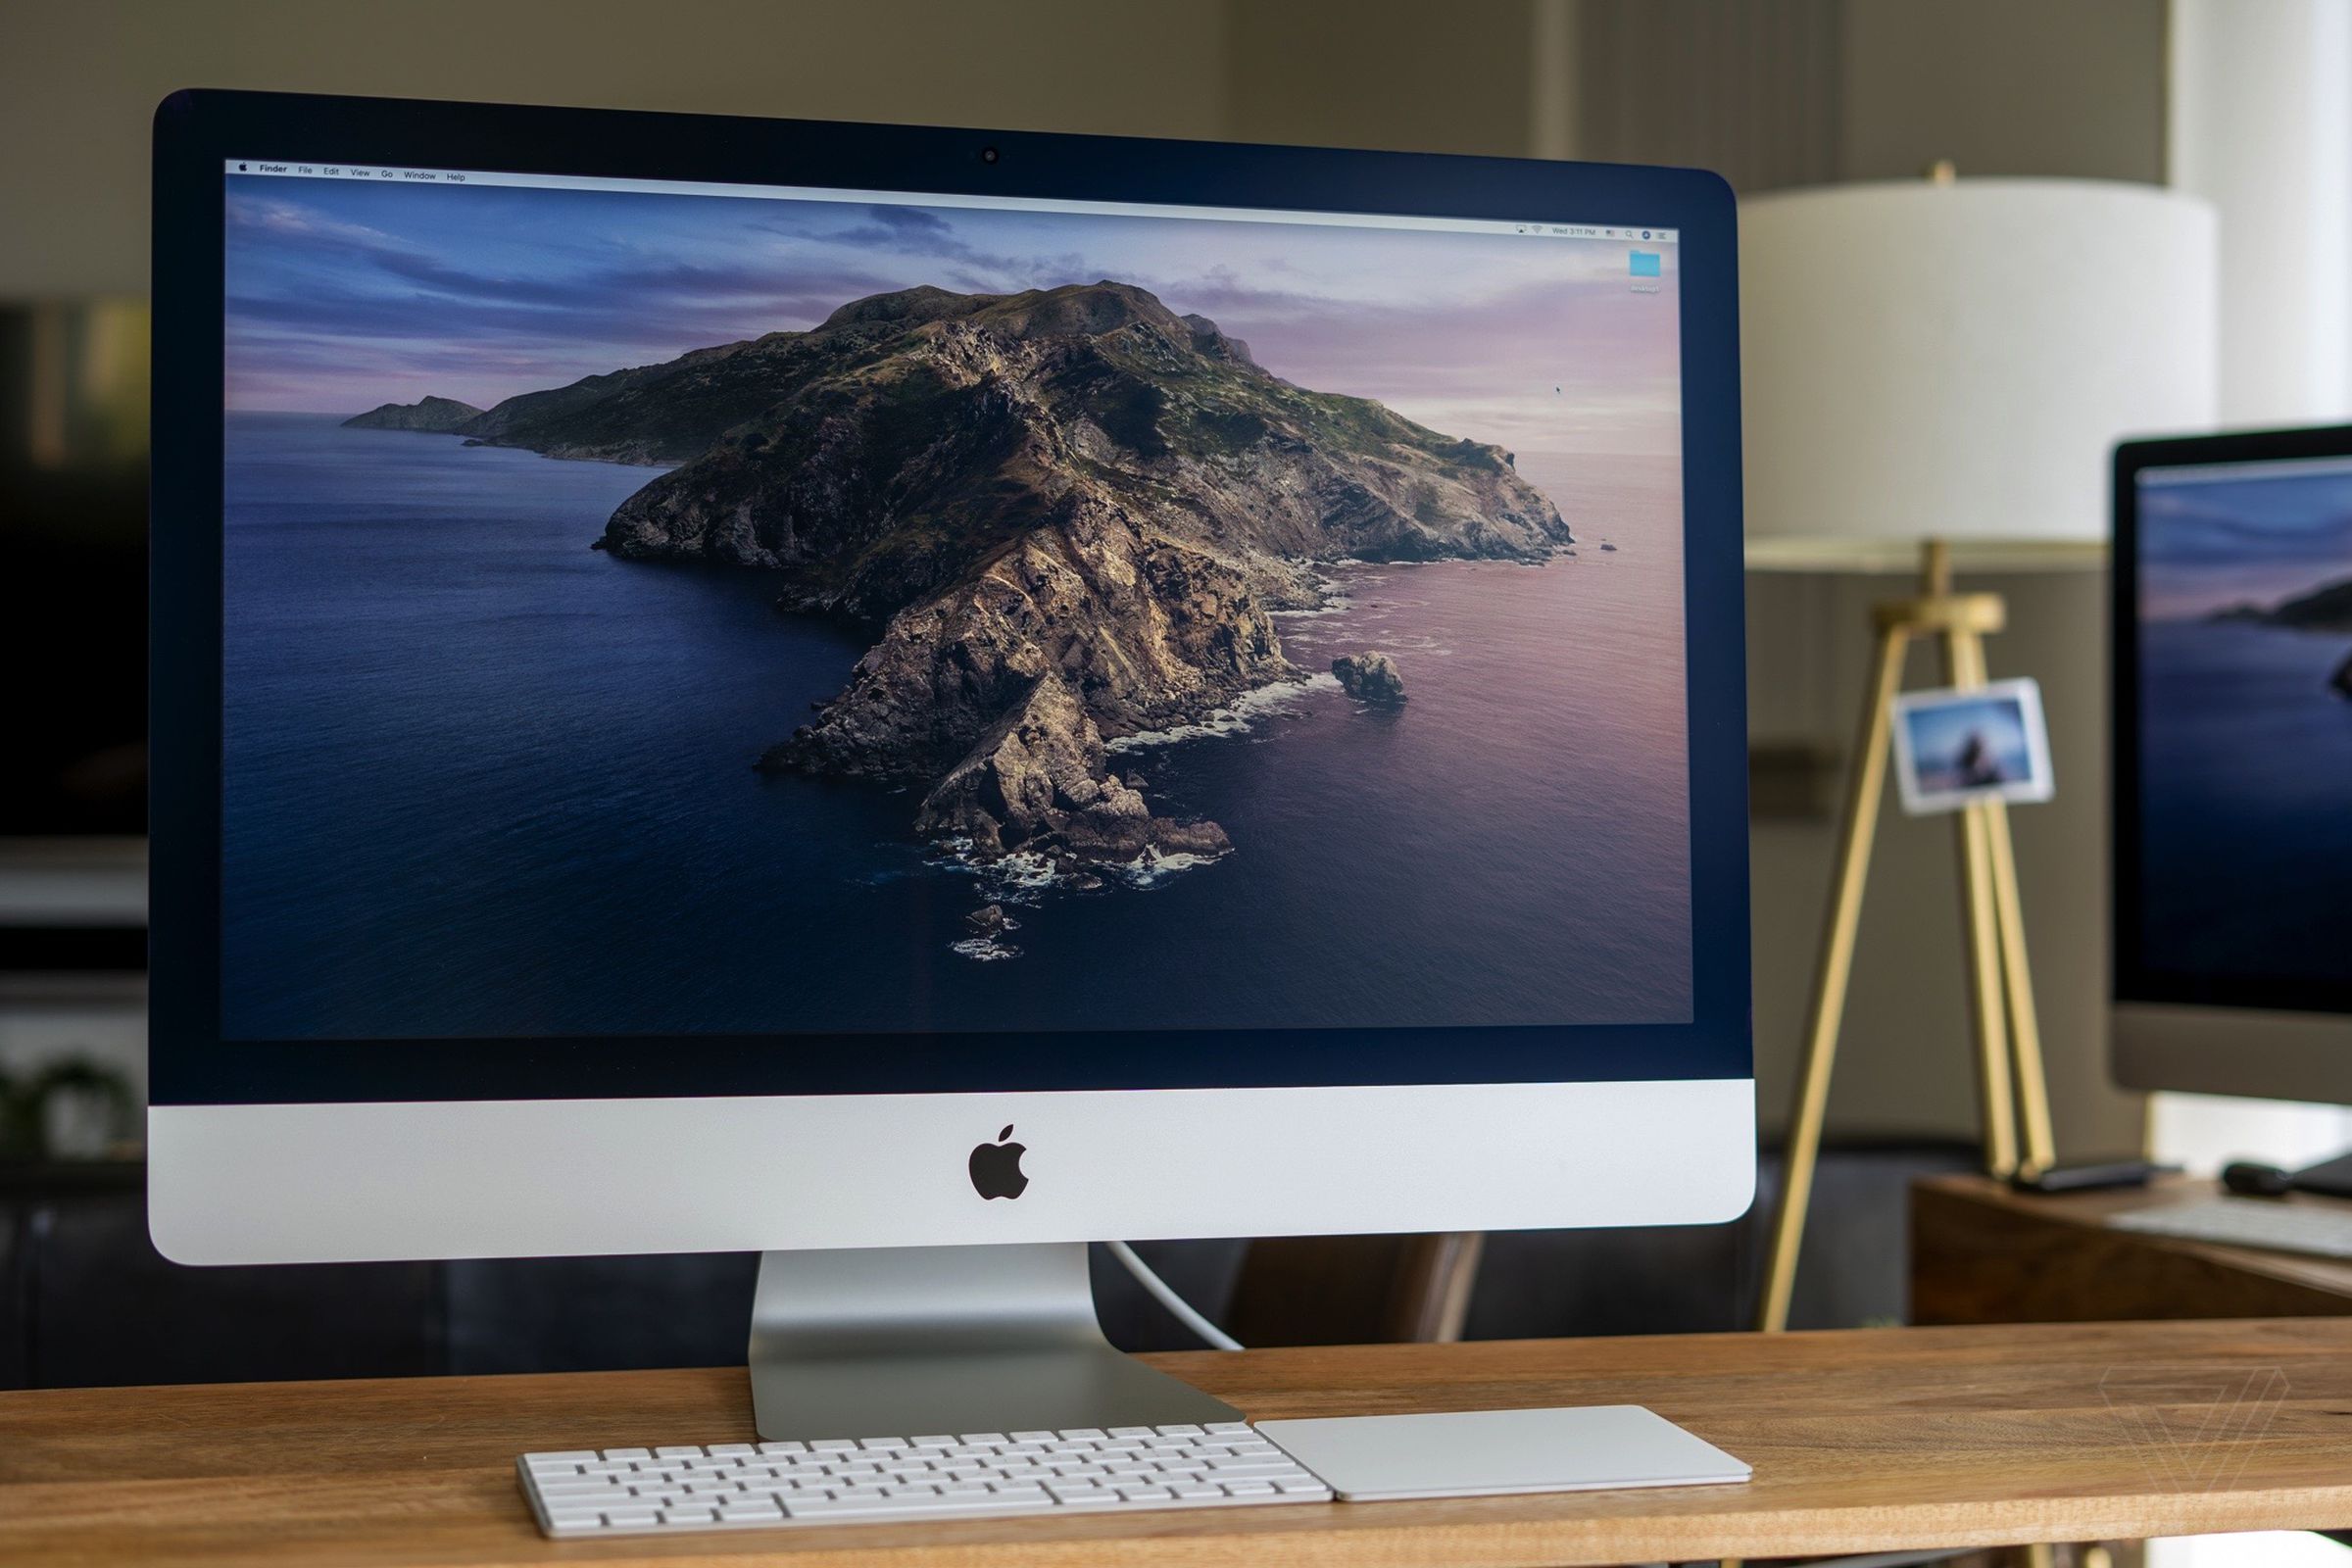 The 2020 iMac with a nano texture screen